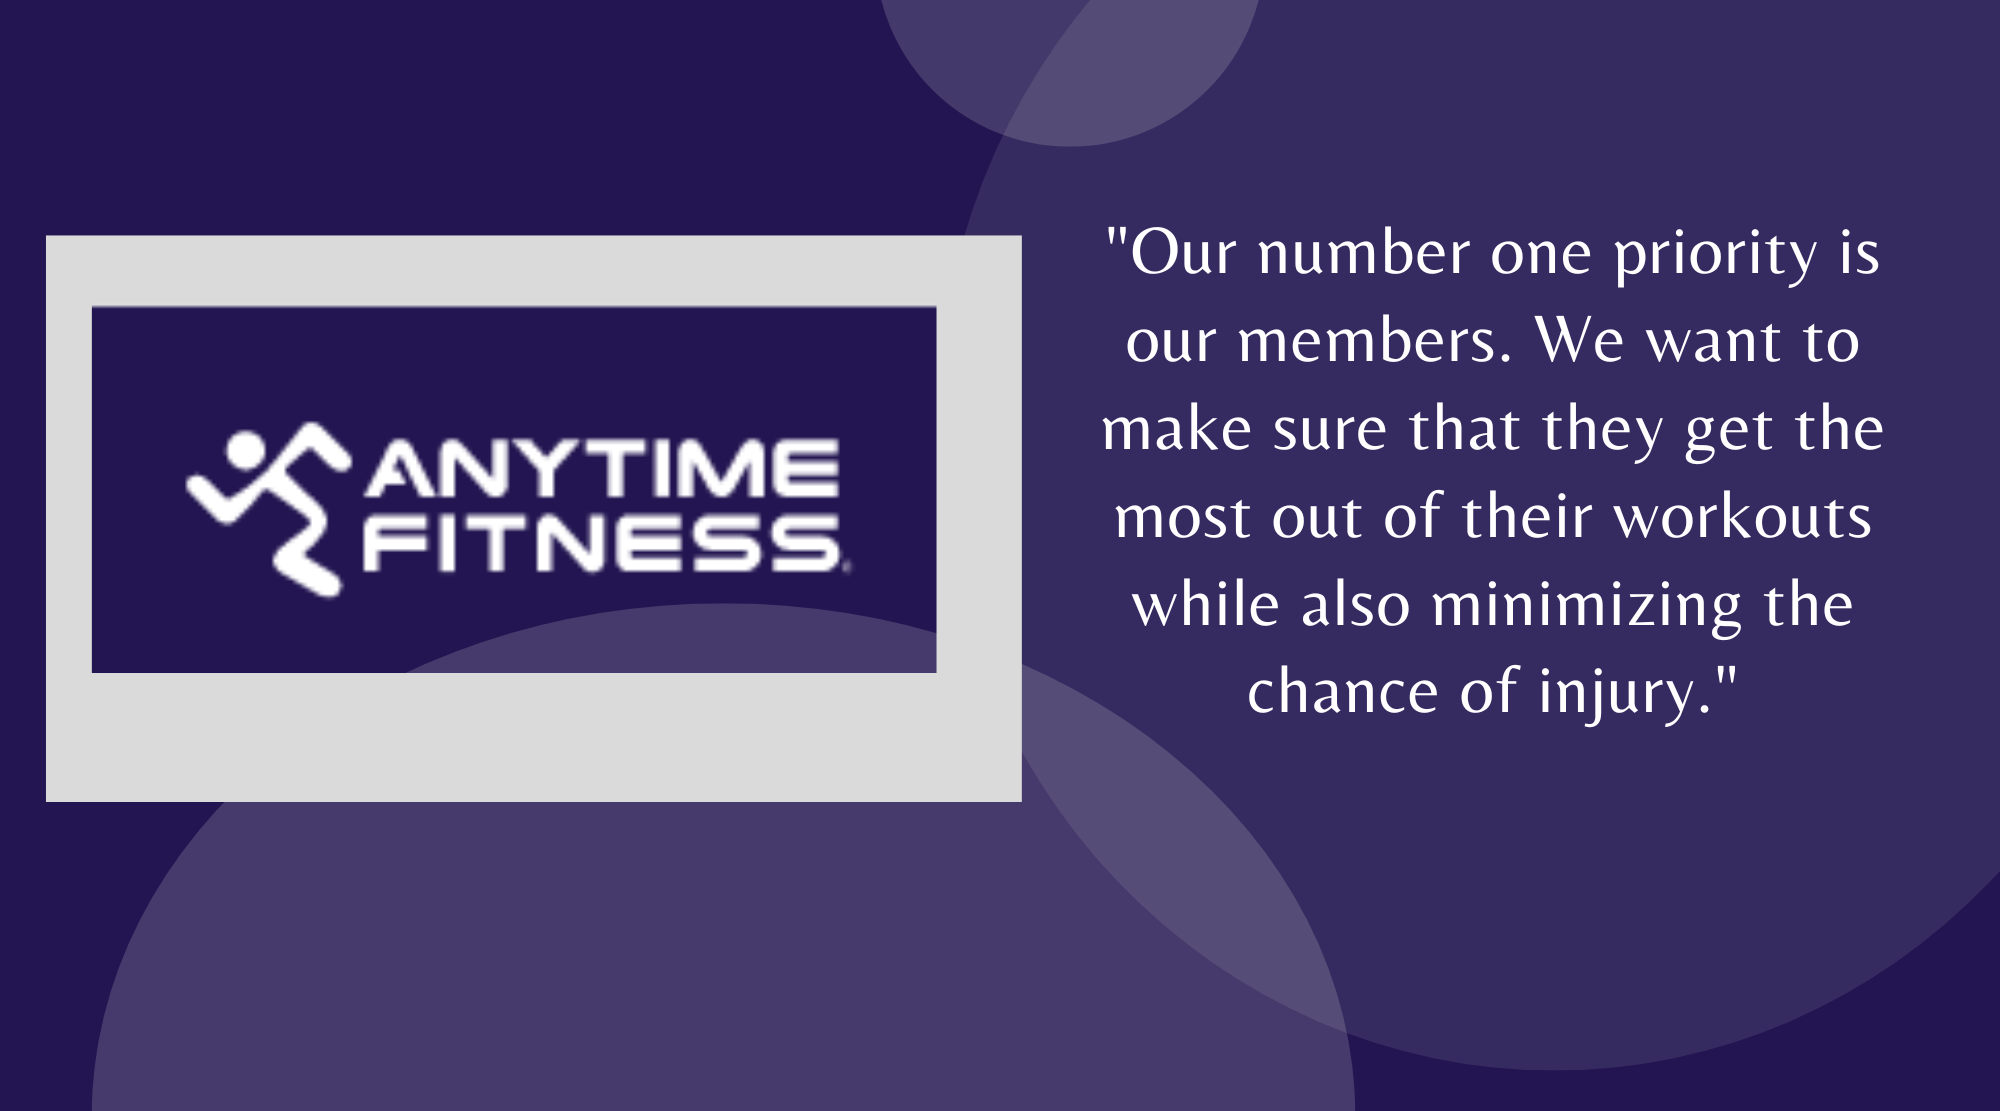 Anytime Fitness, Monday, August 15, 2022, Press release picture